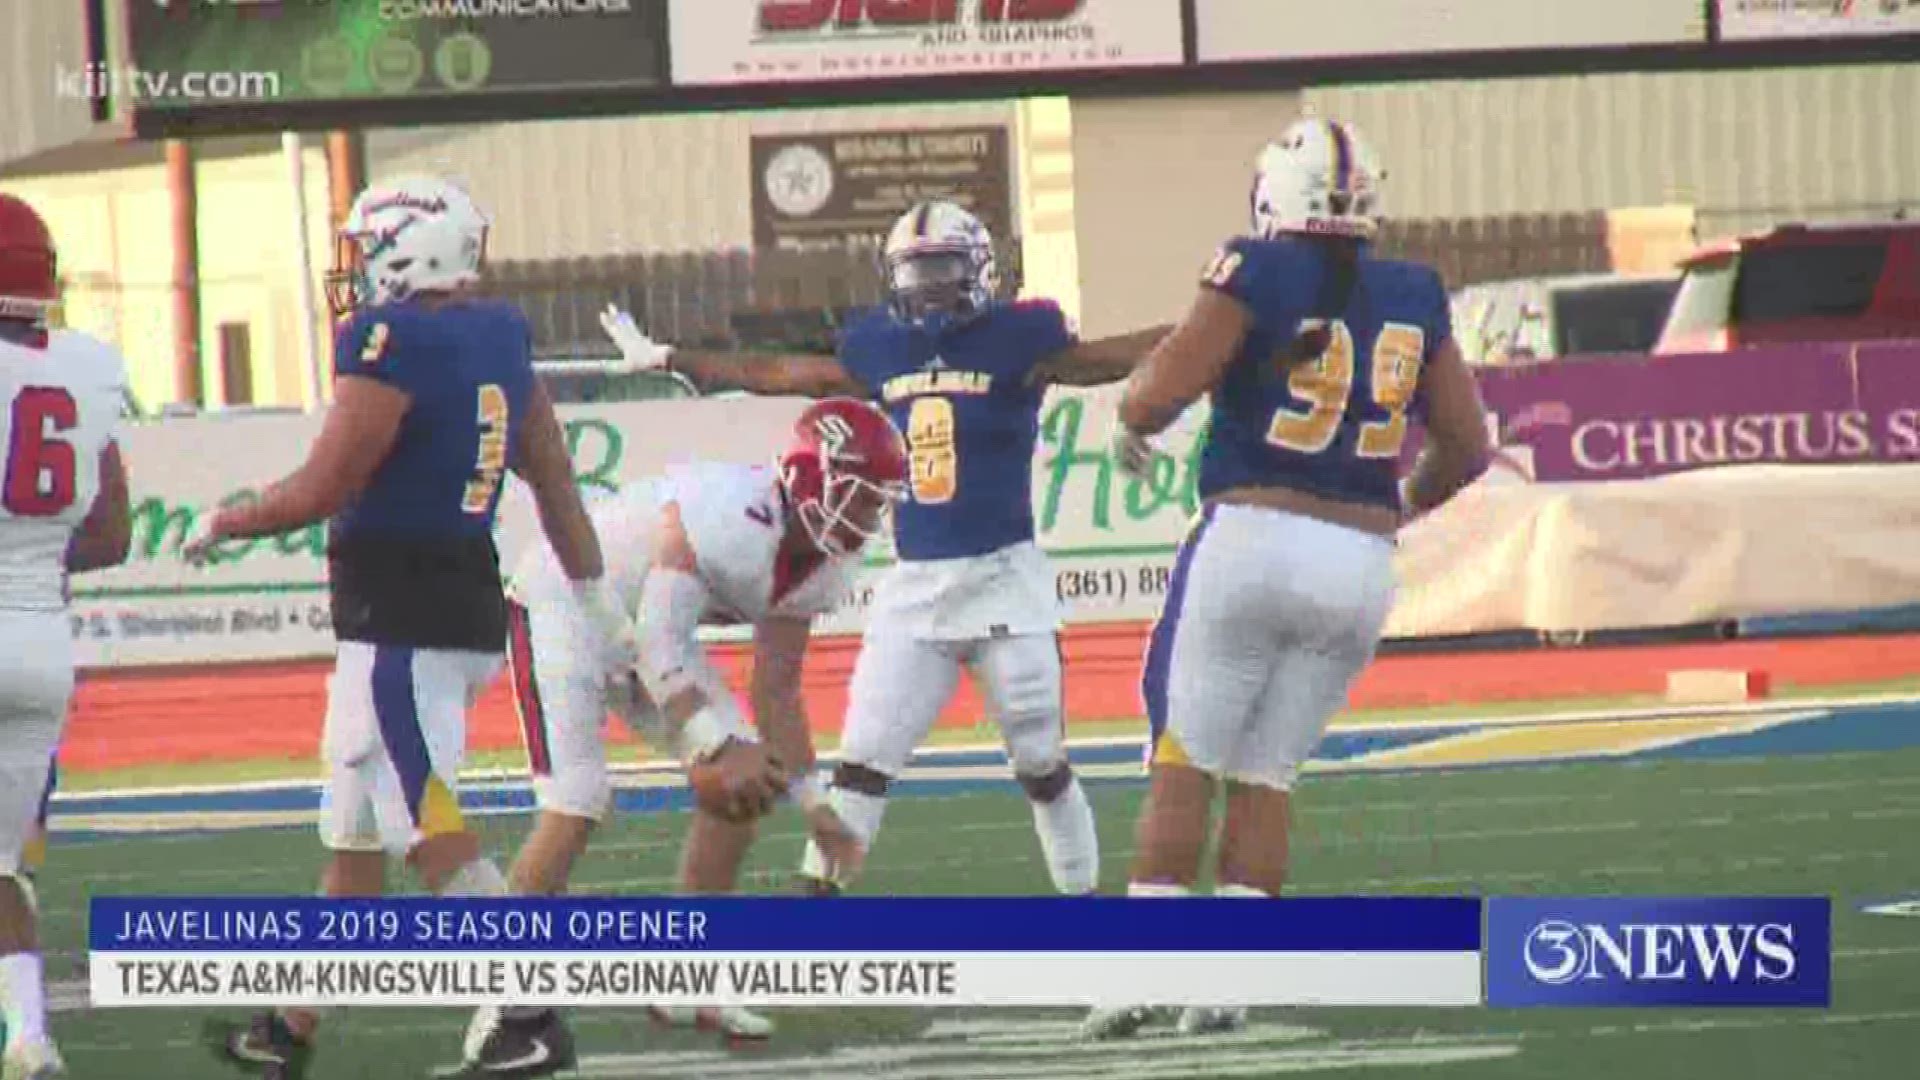 Texas A&M-Kingsville drops it's season opener to Saginaw Valley State 35-14.